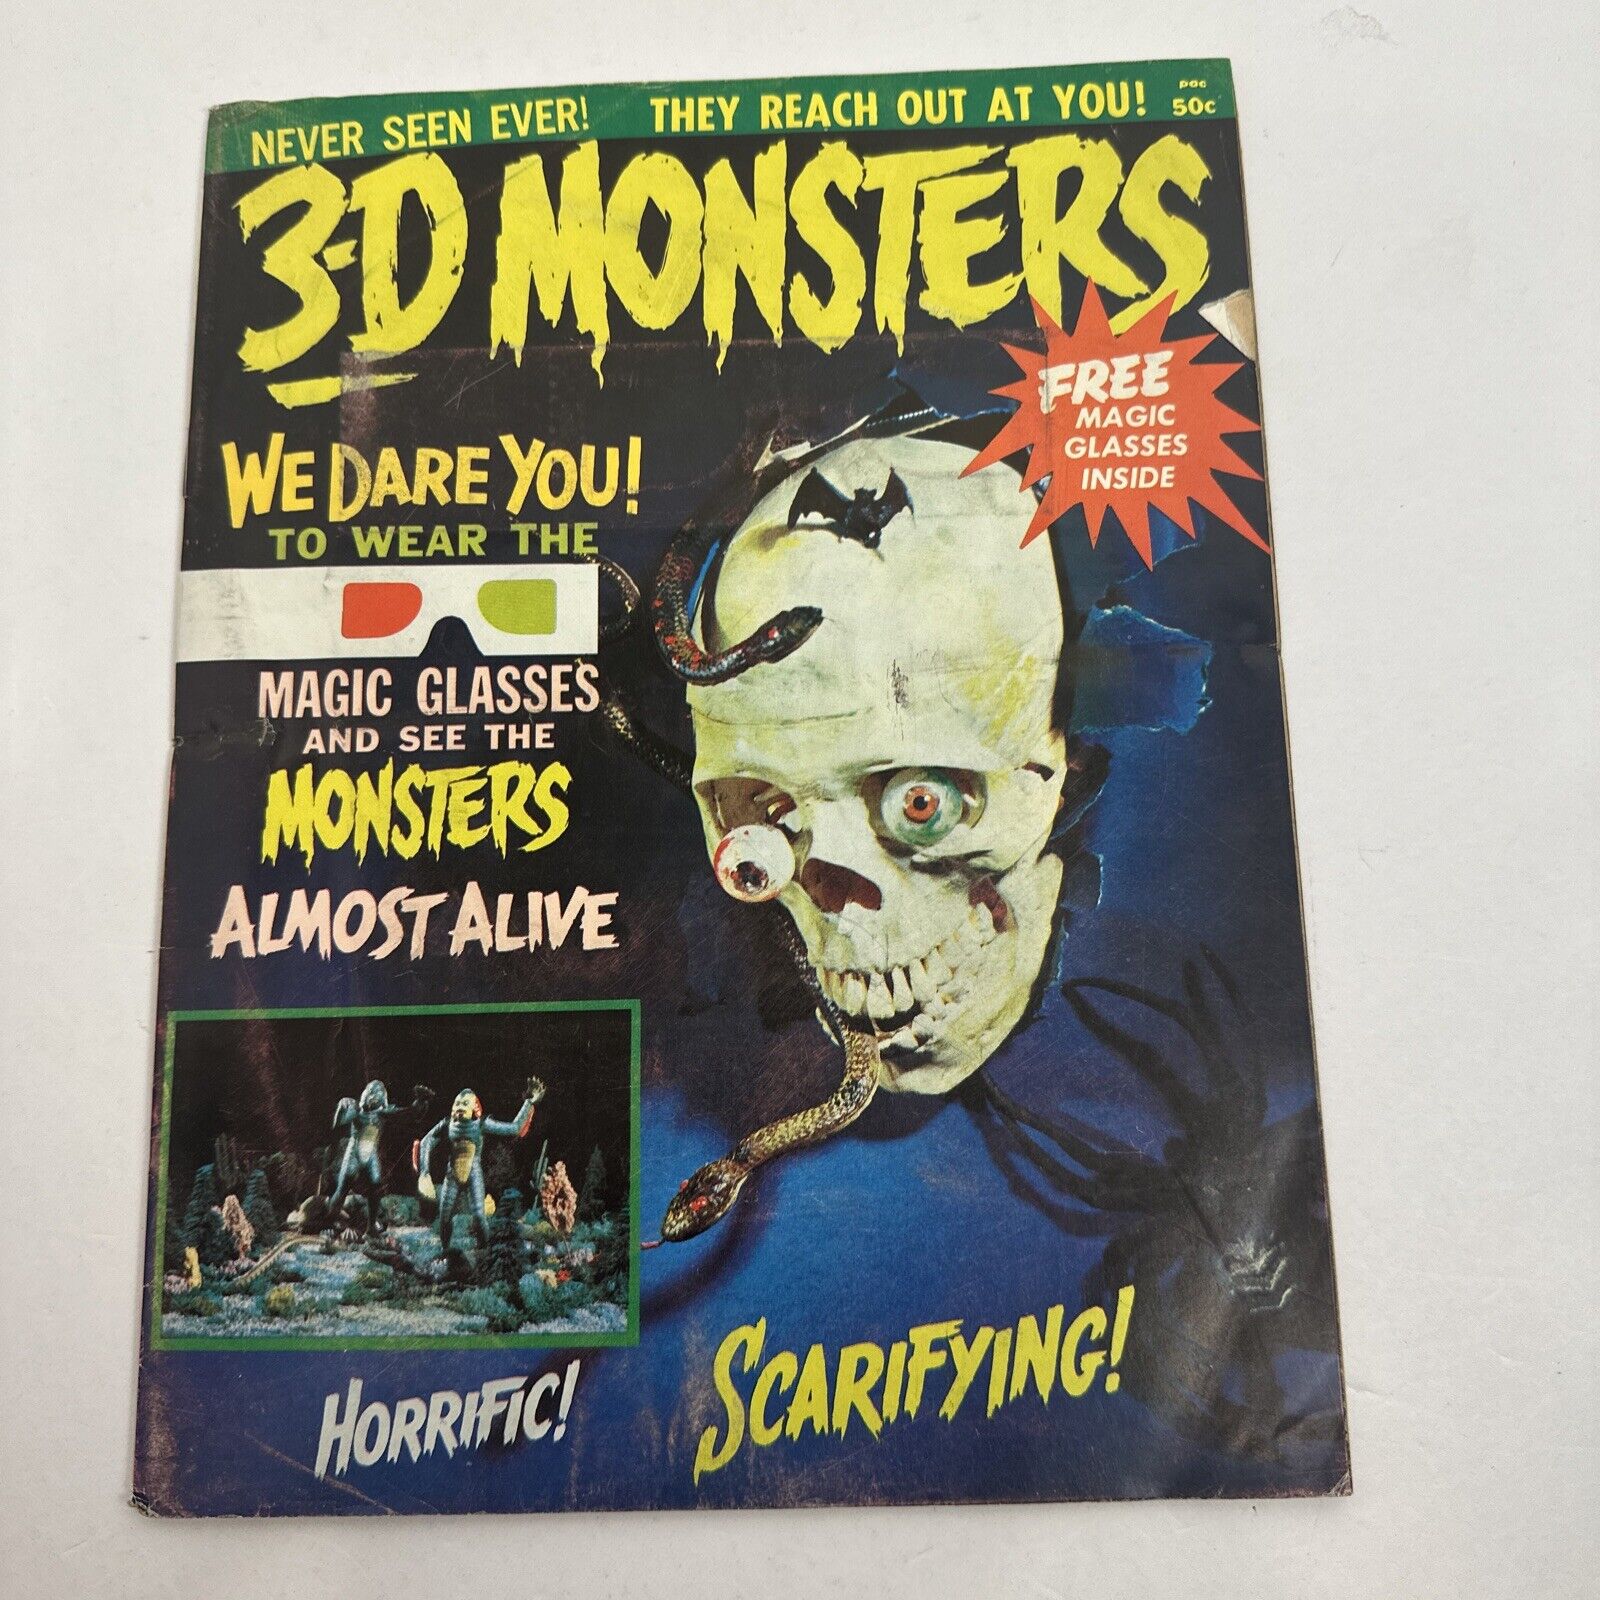 1964 3-D MONSTERS MAGAZINE #1 WITH 3-D GLASSES ATTACHED VG